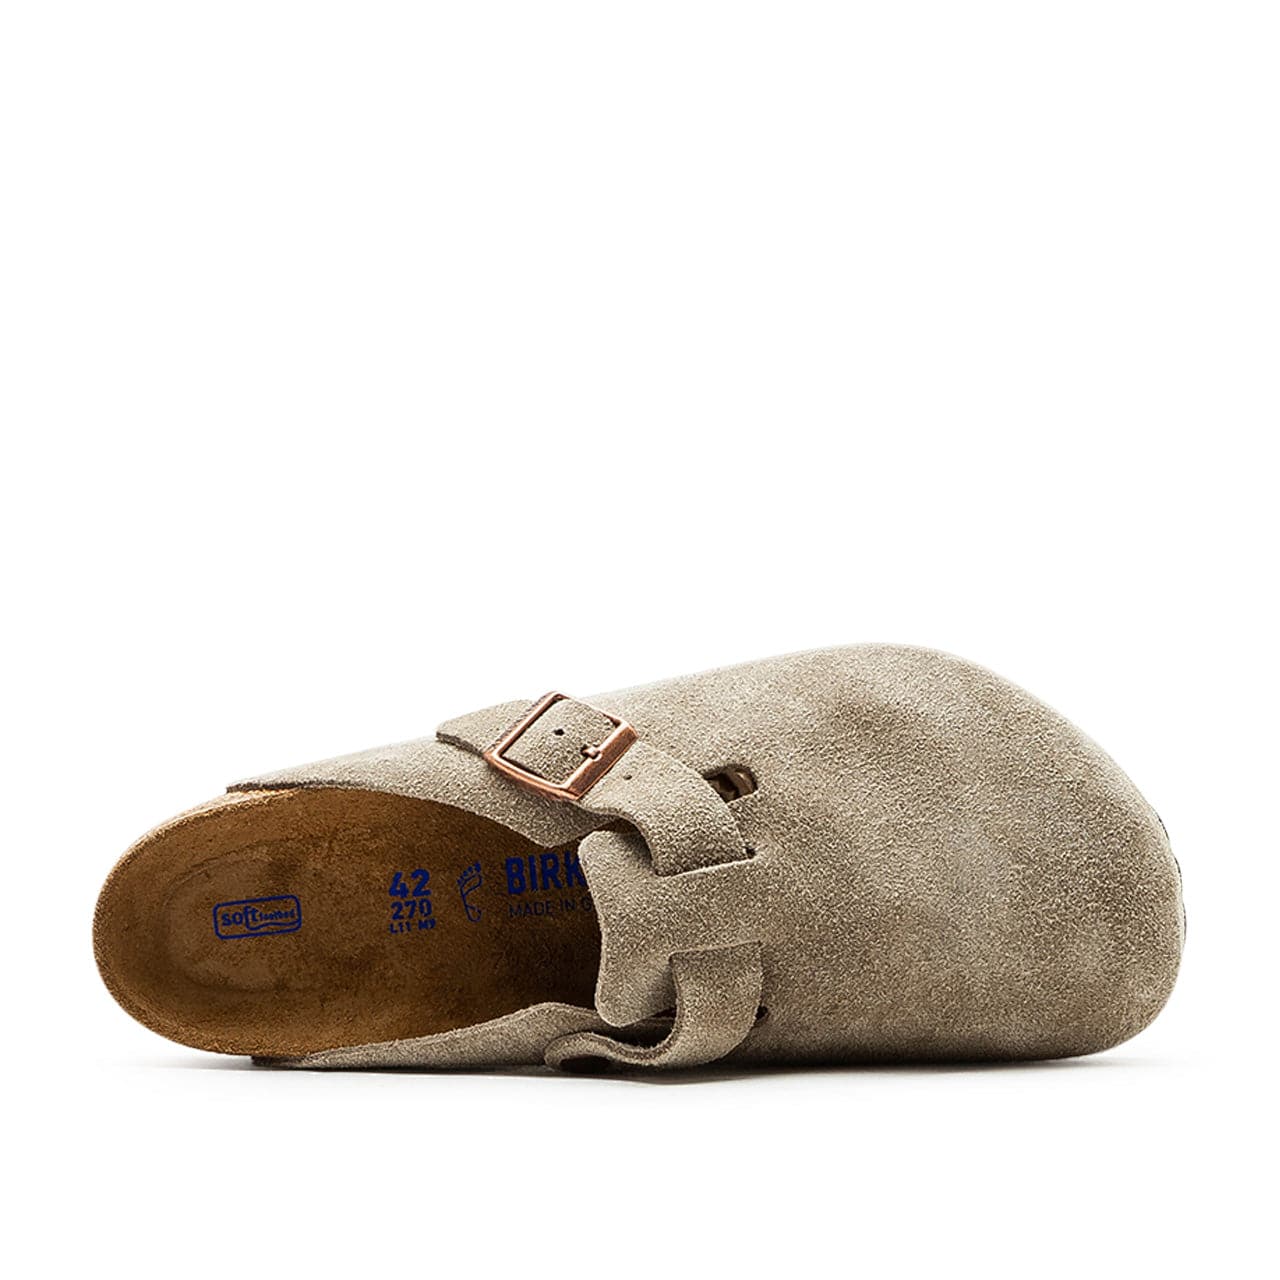 Birkenstock Boston Soft Footbed Suede Leather (Taupe)  - Cheap Juzsports Jordan Outlet